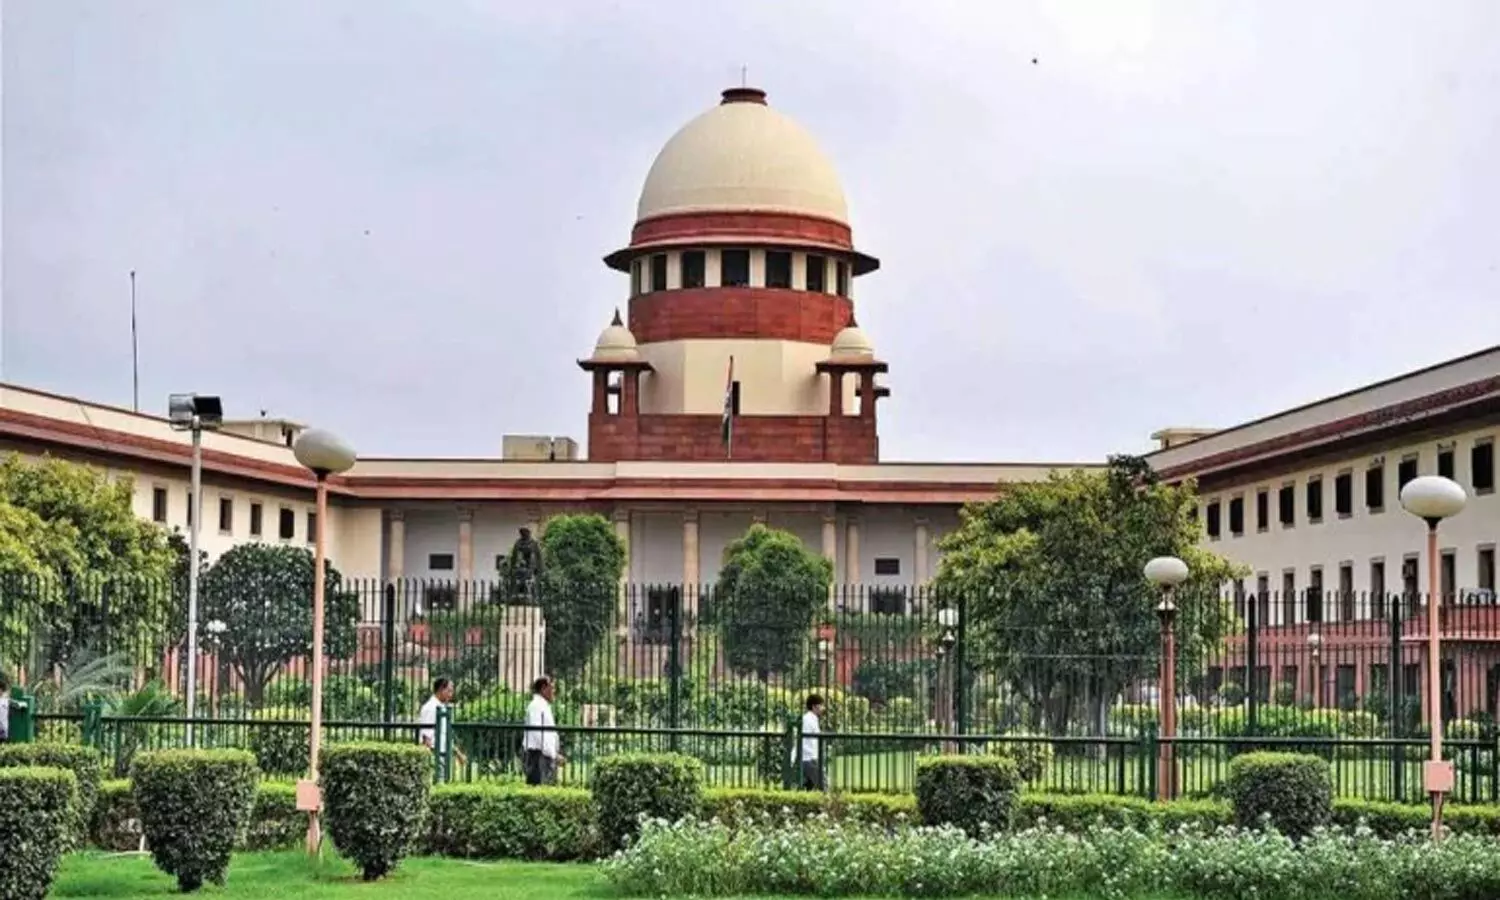 NEET Only for MBBS, BDS admissions: Supreme Court tells CMC Vellore, other minority institutions